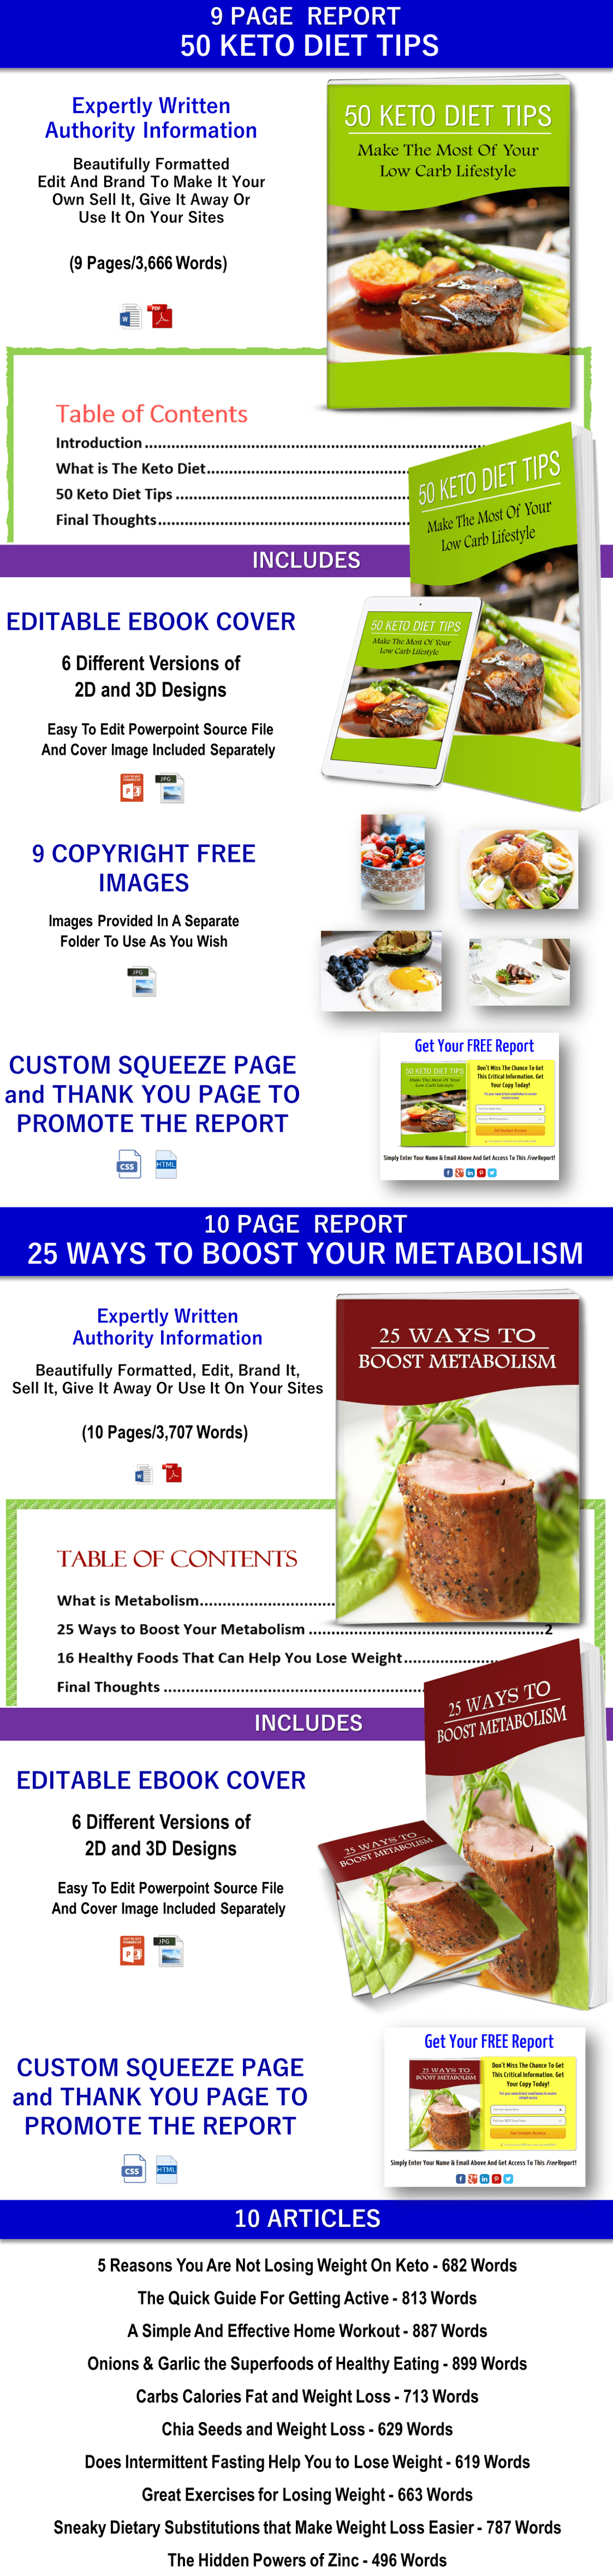 Huge Bundle Of Quality Health, Diet And Weight Loss Content with PLR Rights